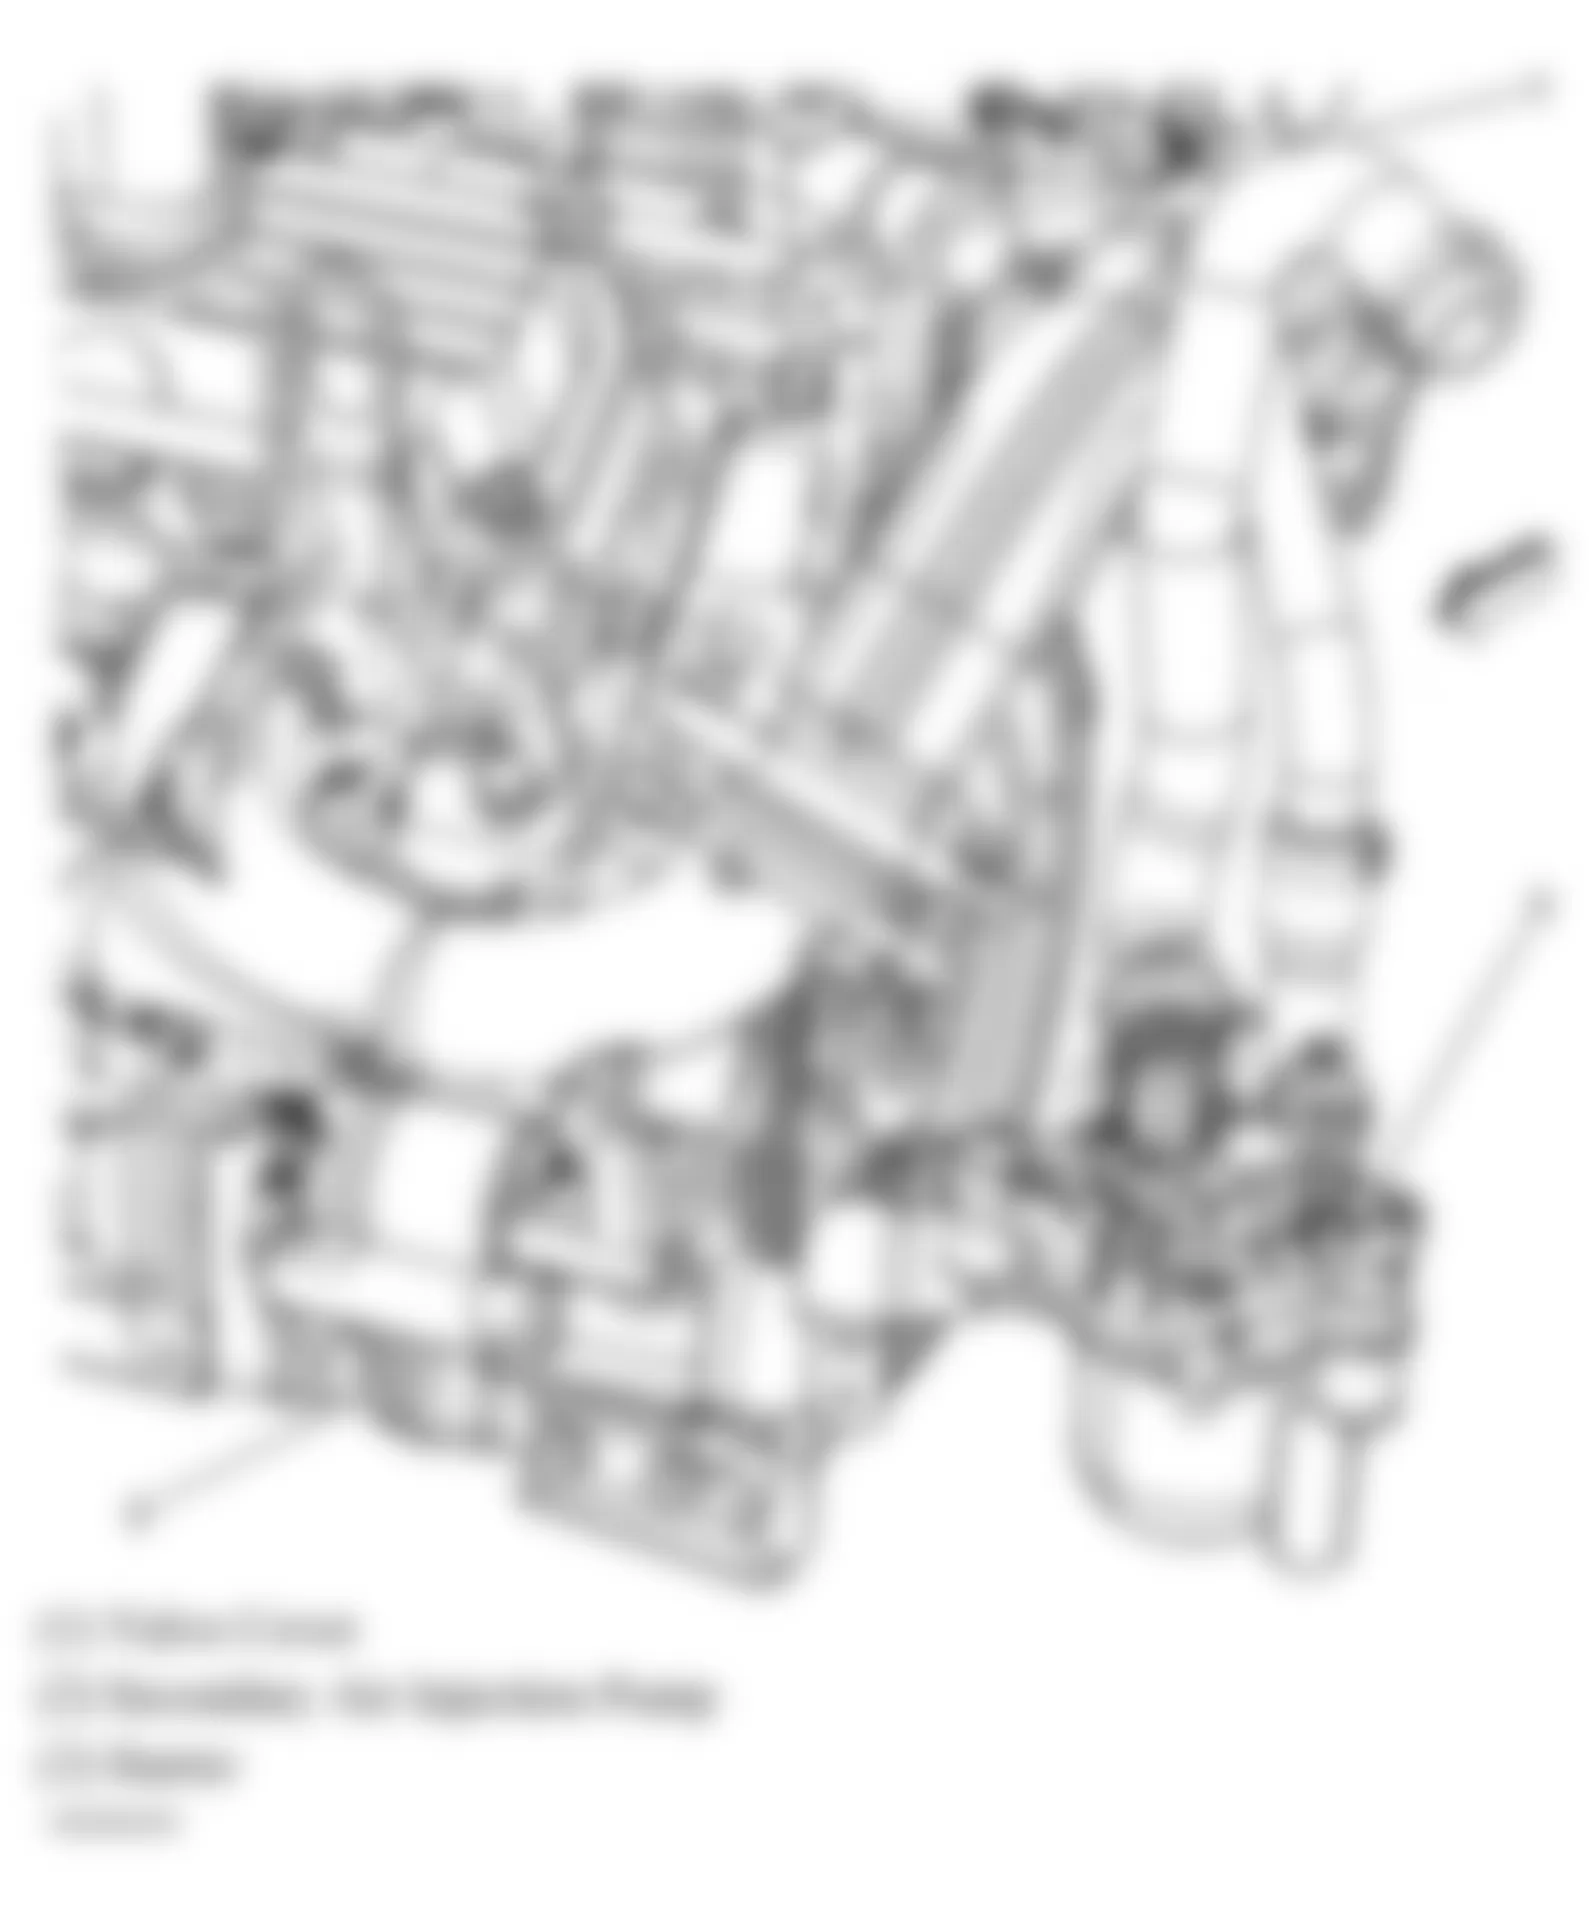 Buick Allure CXS 2005 - Component Locations -  Left Rear Of Engine (3.8L)